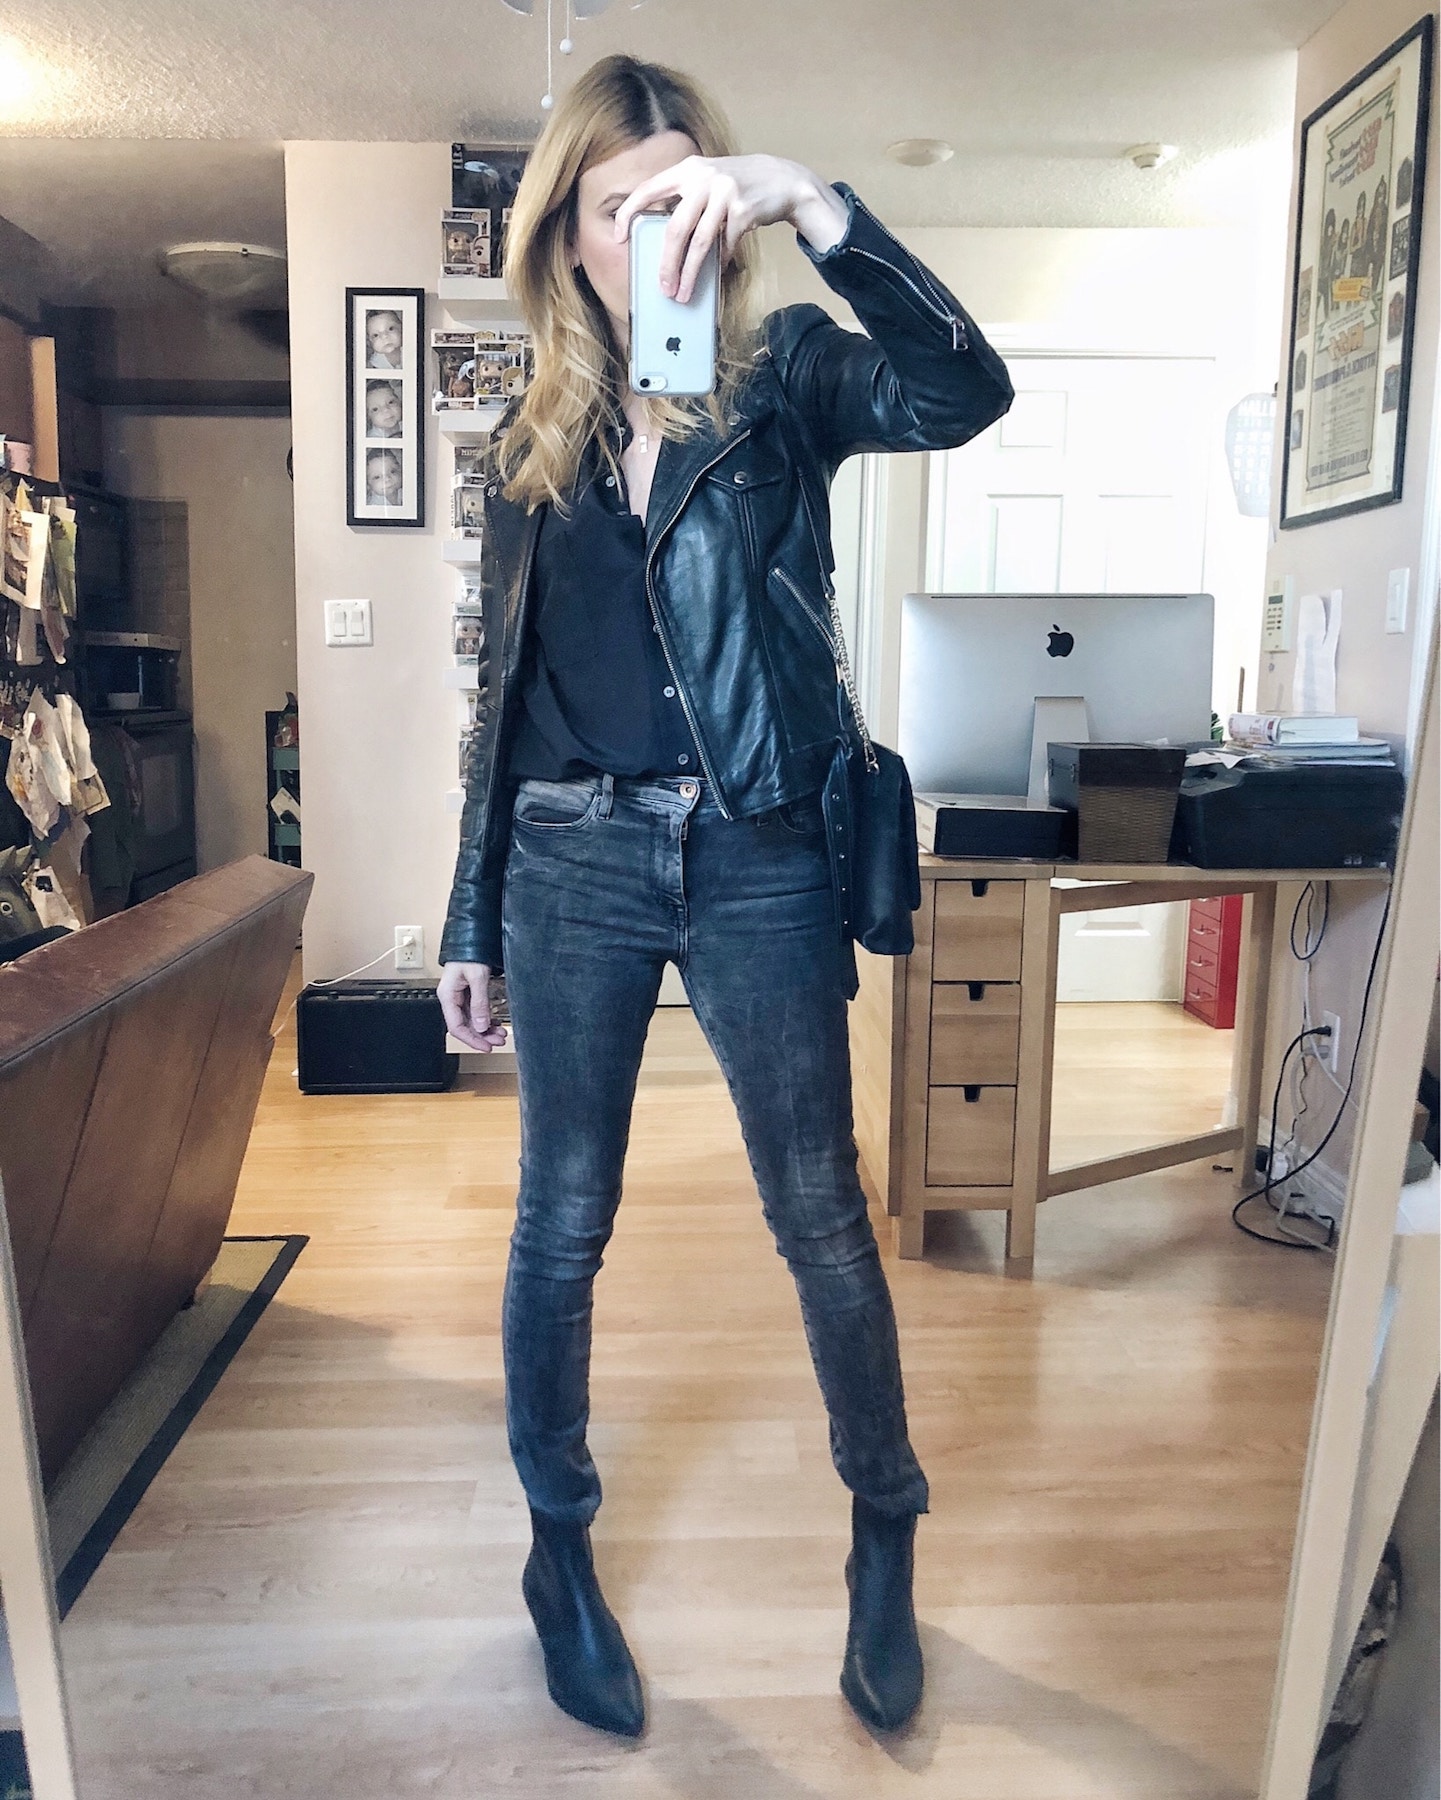 What I Wore. I am wearing grey skinny jeans, a black silk blouse, a moto jacket, and black booties.